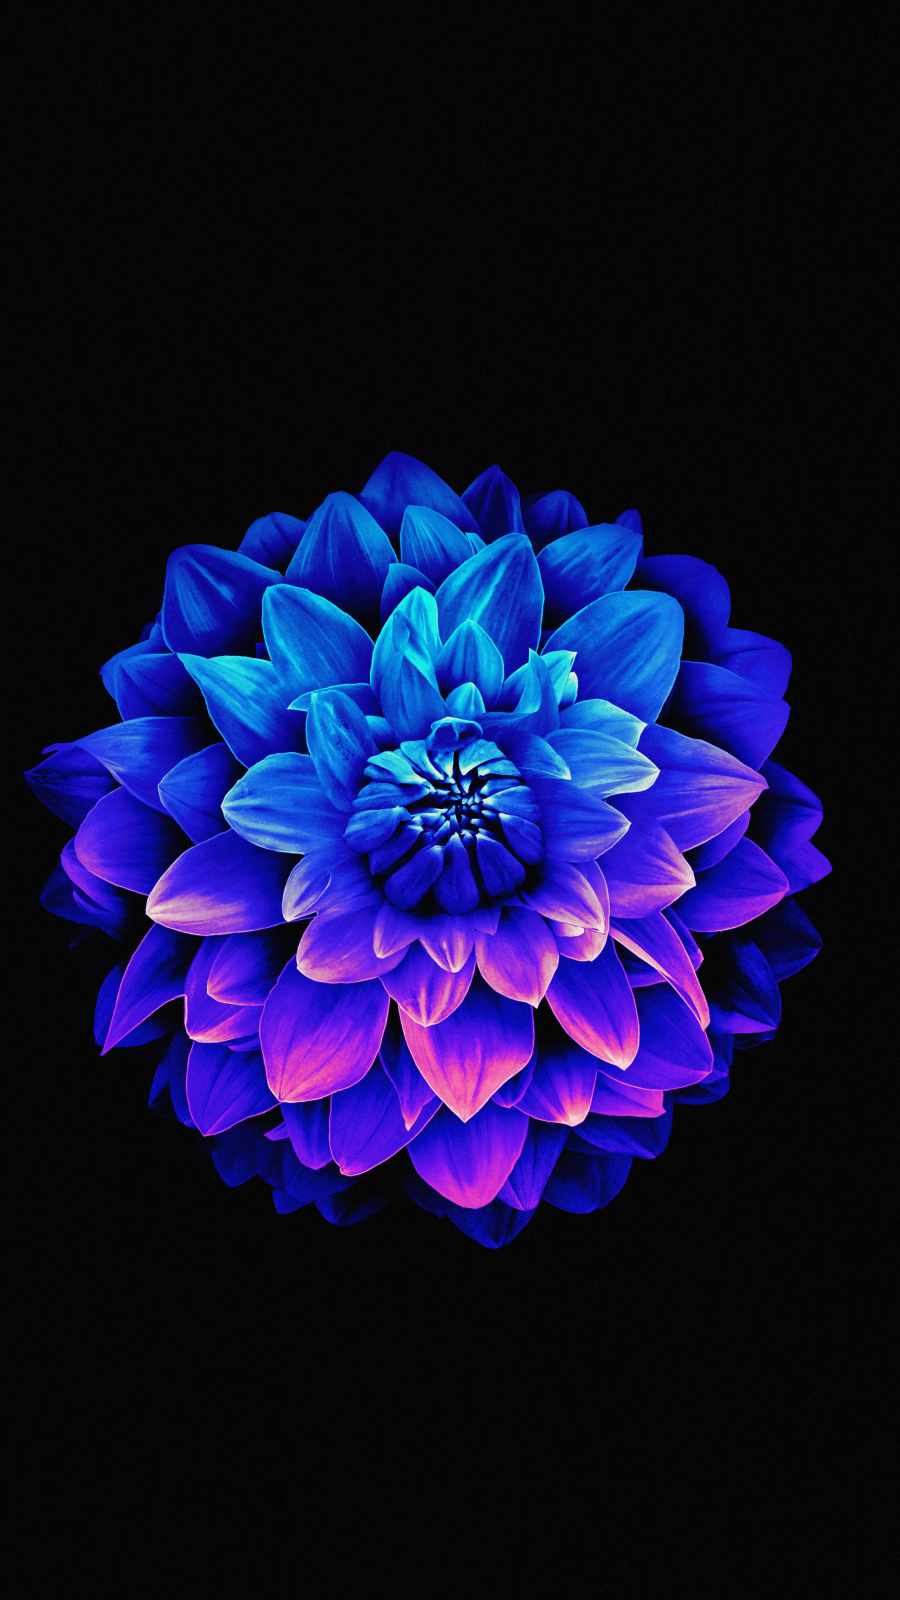 Amoled Flower IPhone Wallpaper - IPhone Wallpapers : iPhone Wallpapers